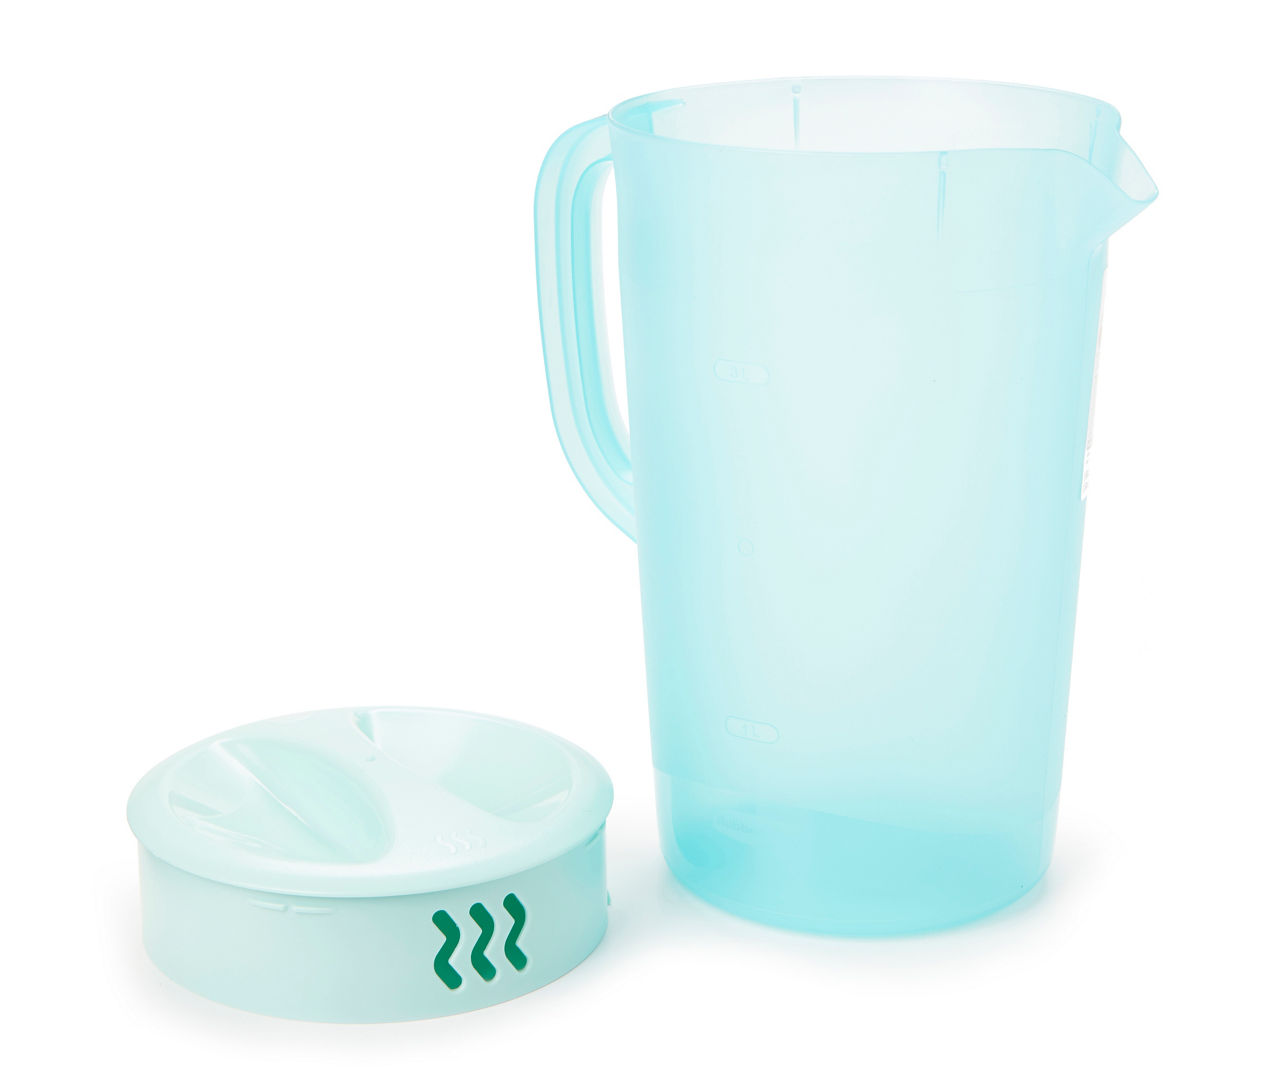 Rubbermaid Pitcher - Blue, 1 gal - Mariano's